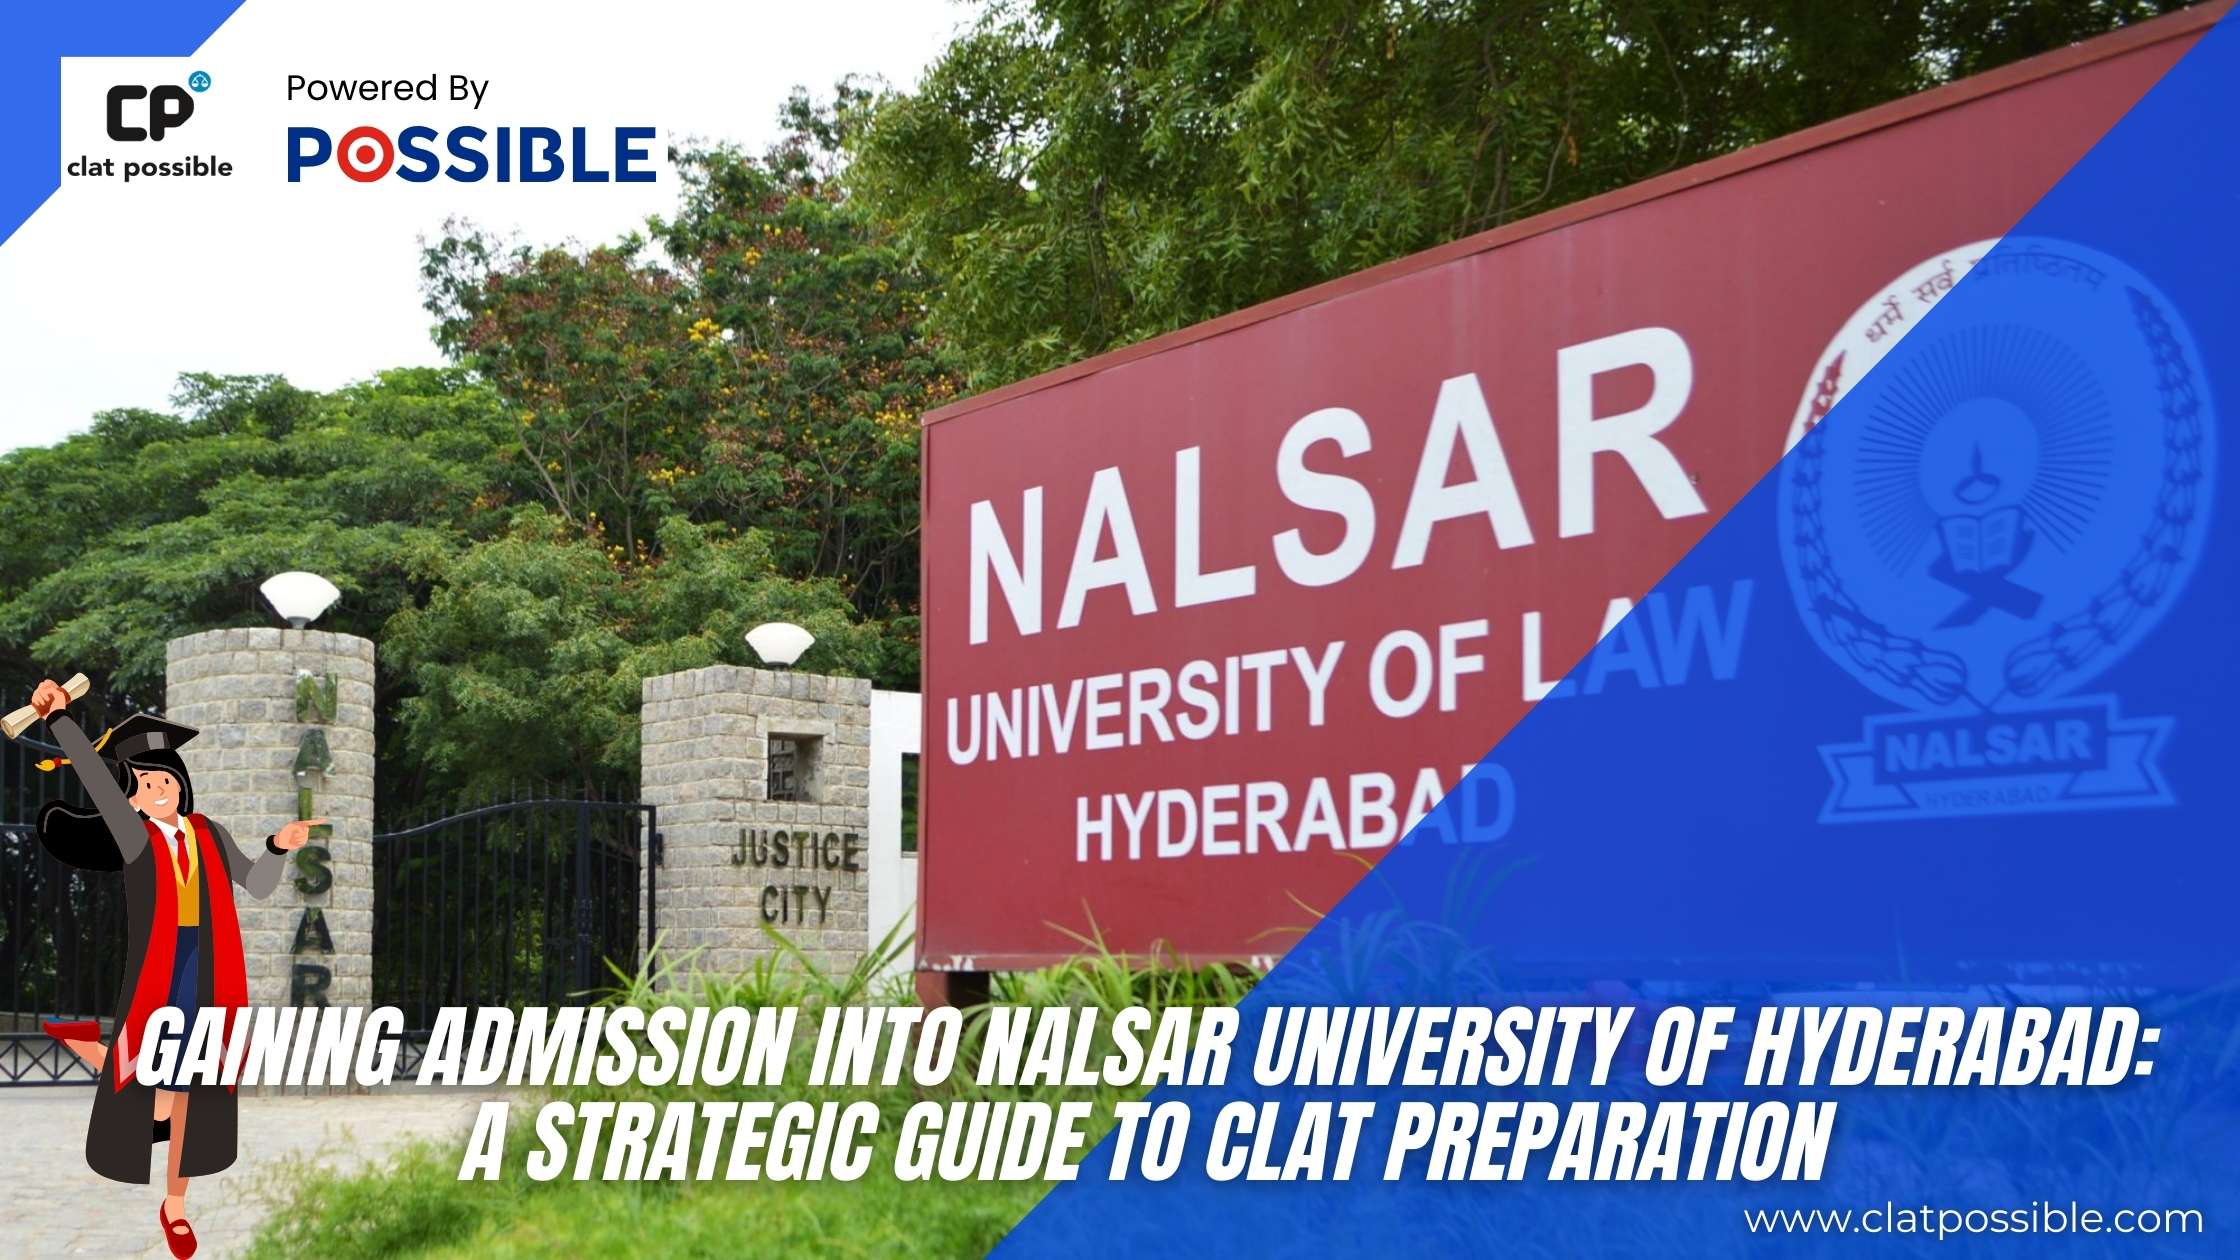 Admission into NALSAR University of Hyderabad